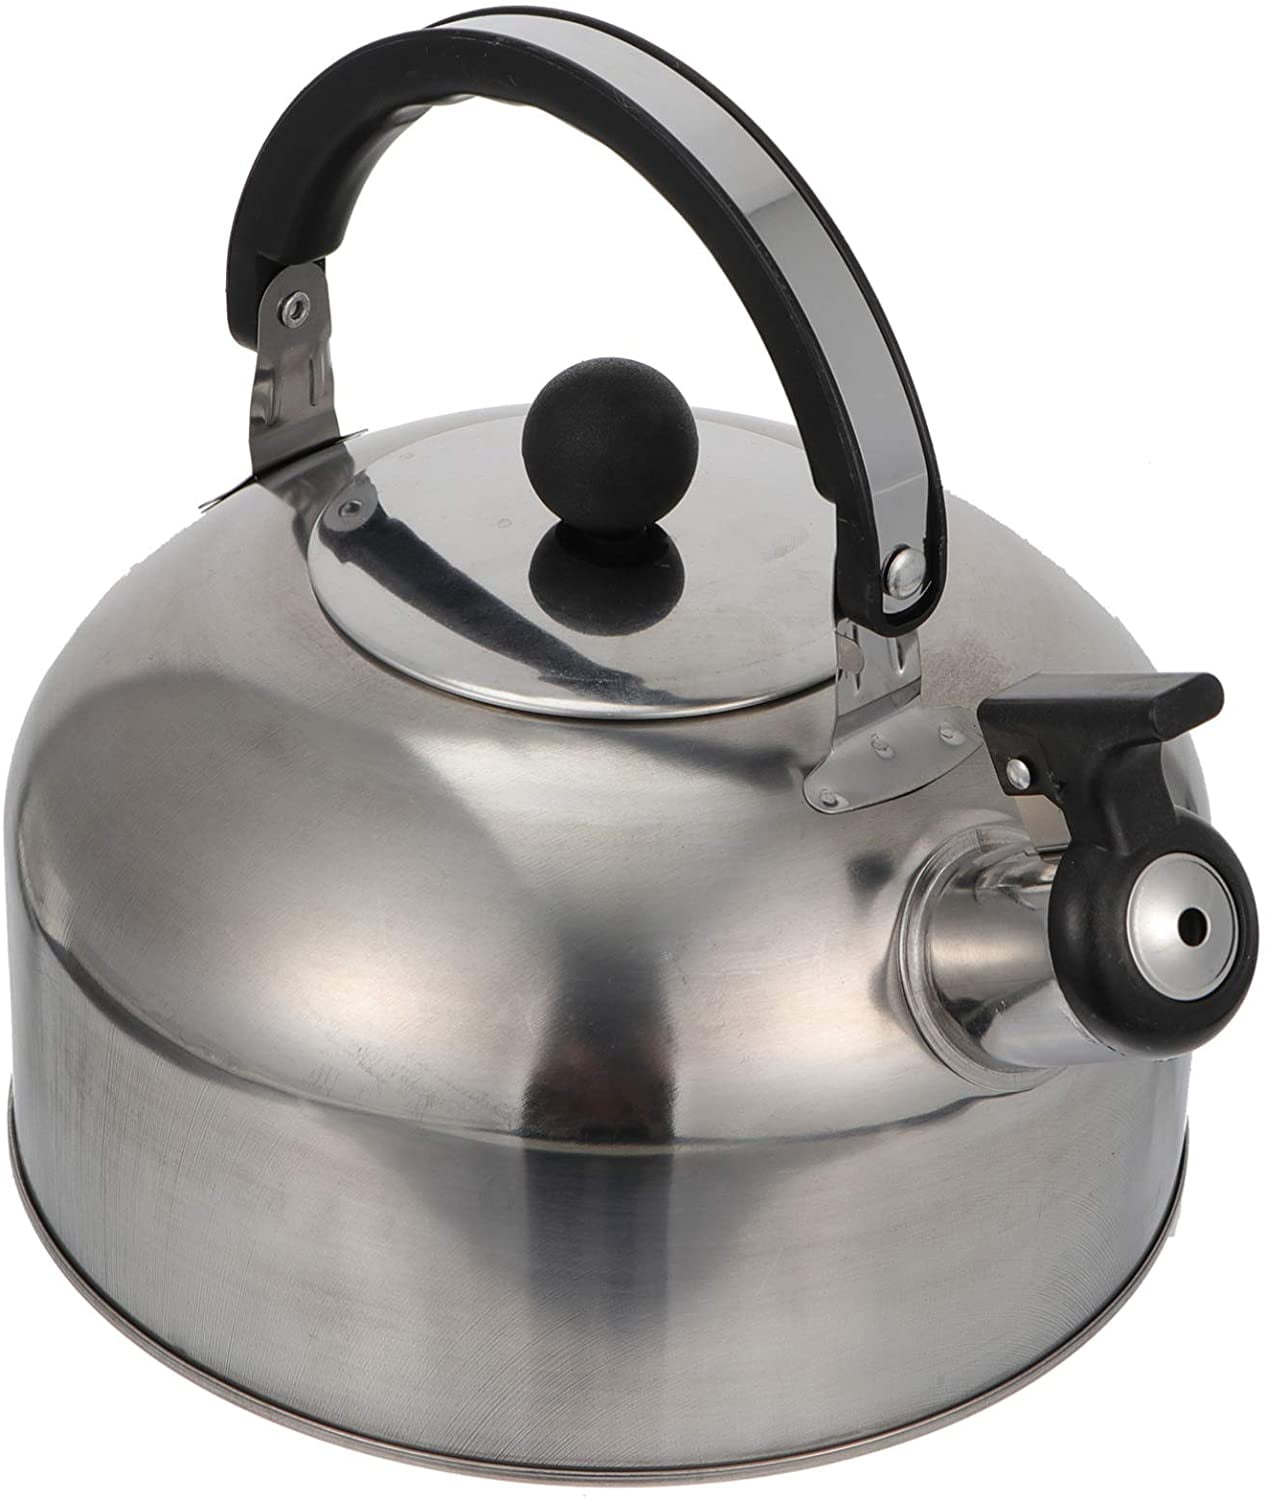 Whistling Kettle Tea Coffee Teapot Kitchen Camping Stainless with Infuser 